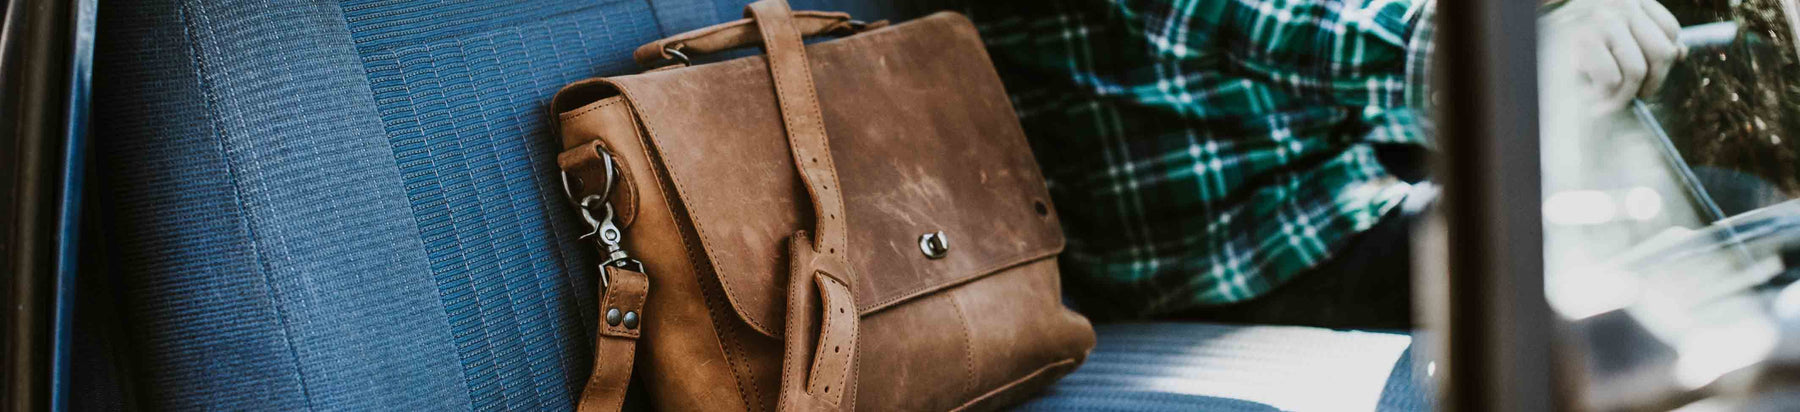 Leather Laptop Bags for Men Premium Brown or Black Leather 